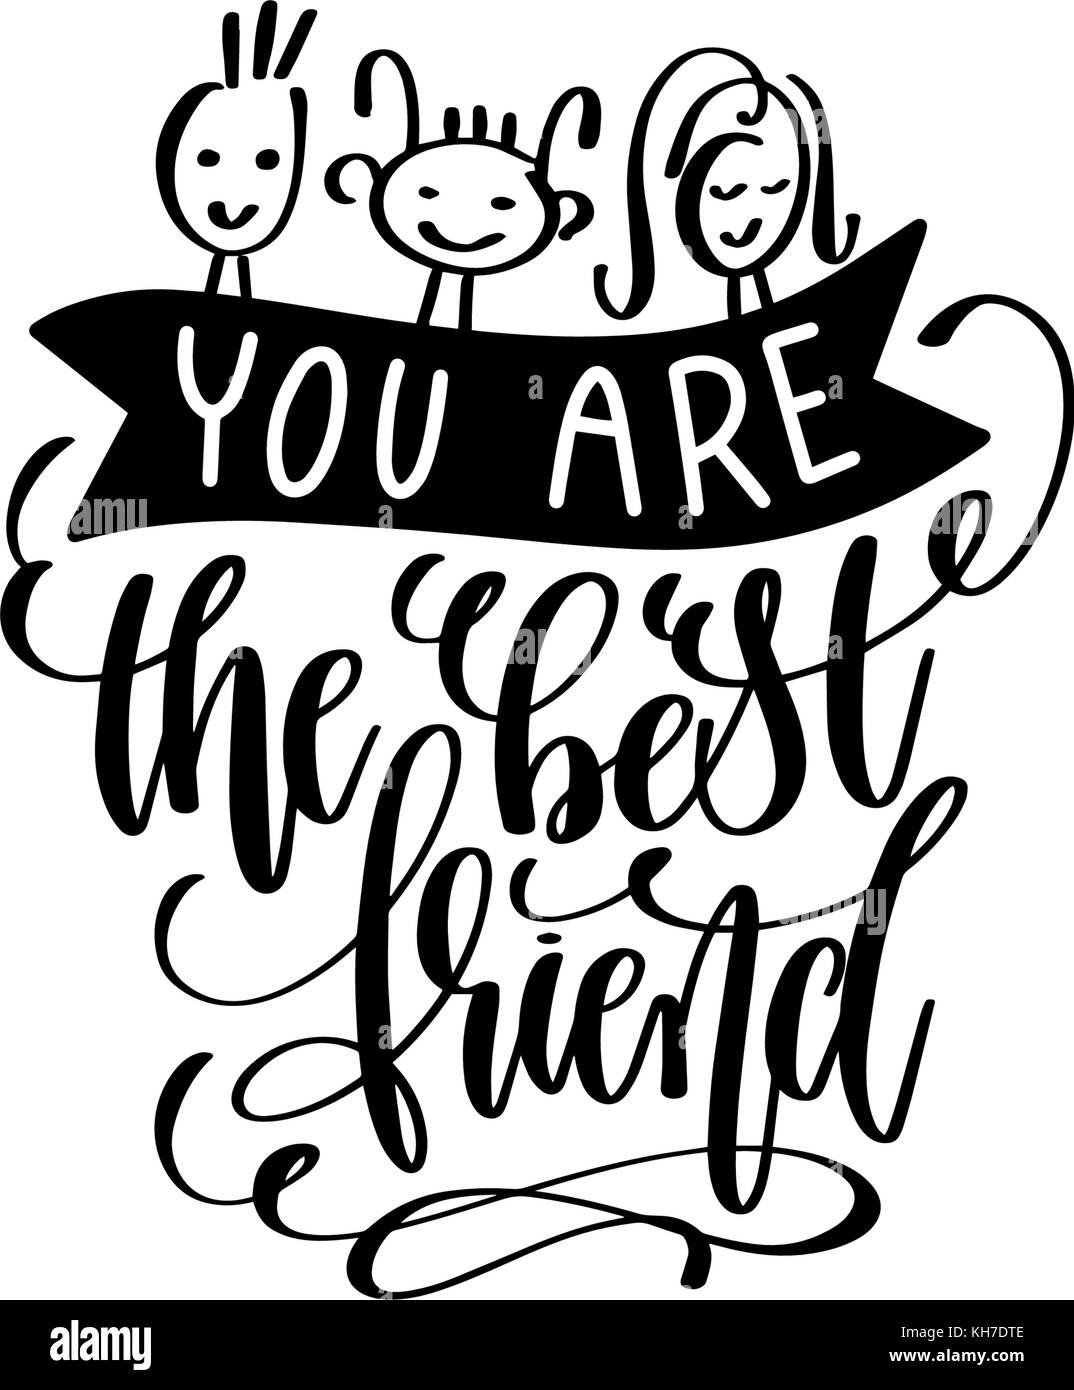 You Are My Best Friend Images – Browse 39 Stock Photos, Vectors